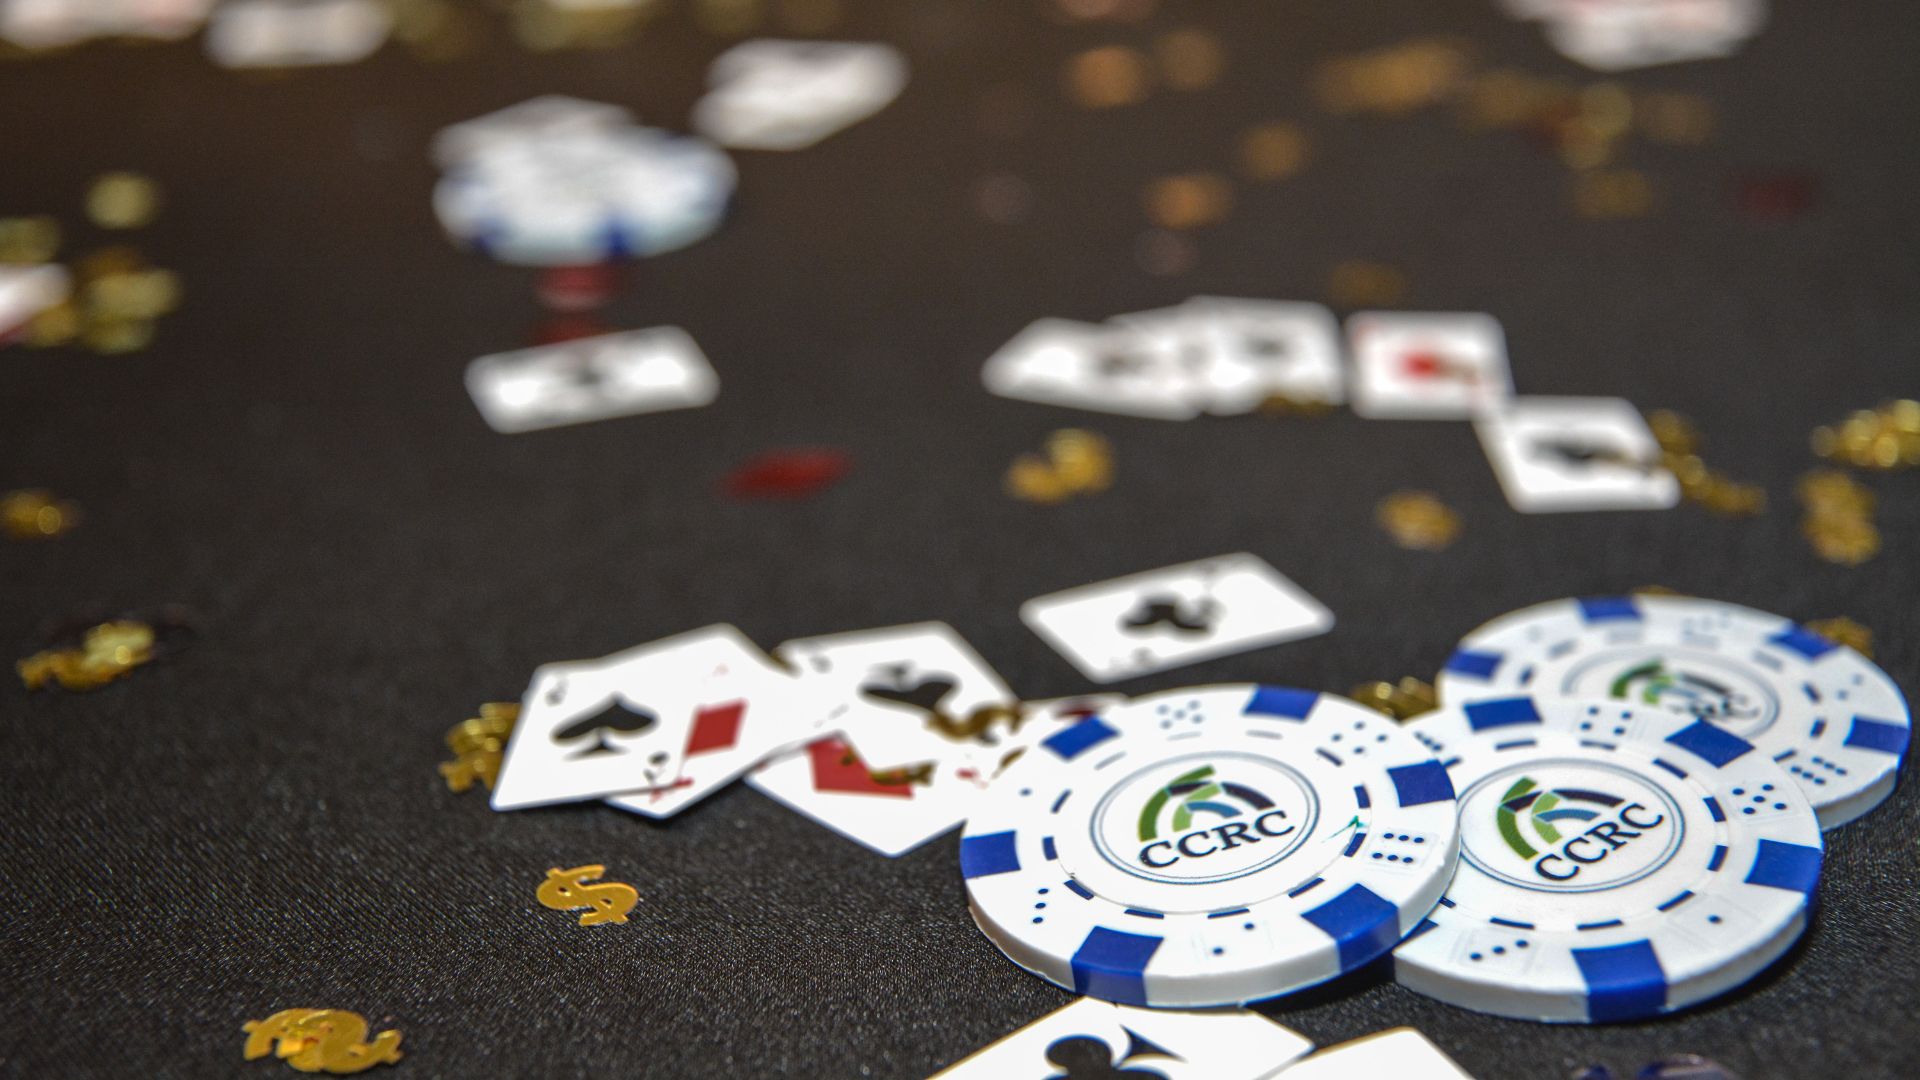 An image featuring poker chips with CCRC’s logo on a black tablecloth. Used as promotional artwork for Poker Tournament fundraiser.